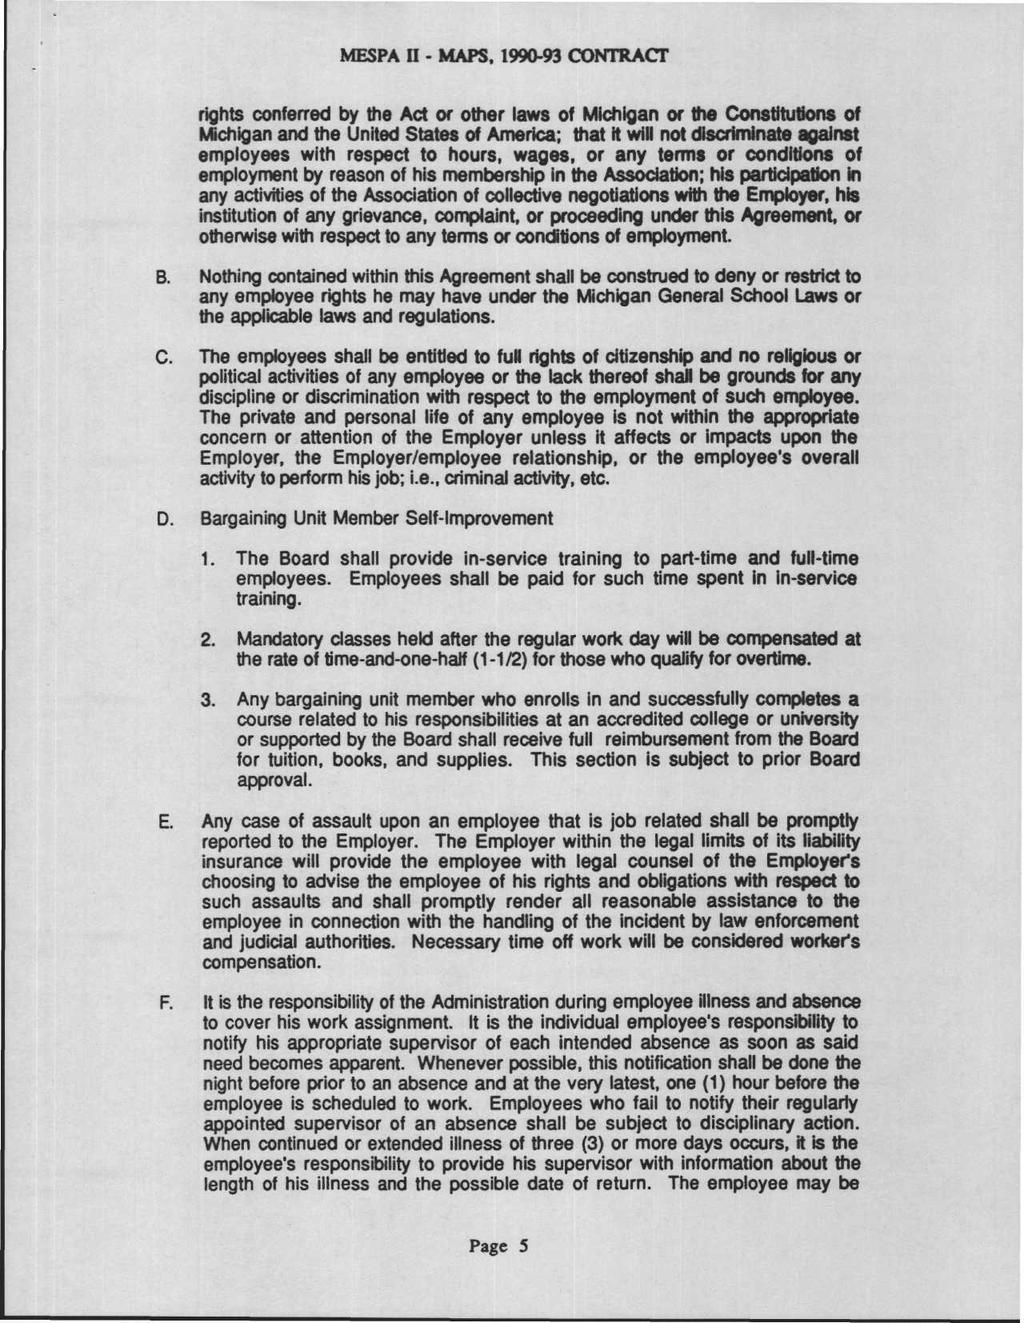 MESPA II - MAPS, 1990-93 CONTRACT rights conferred by the Act or other laws of Michigan or the Constitutions of Michigan and the United States of America; that it will not discriminate against